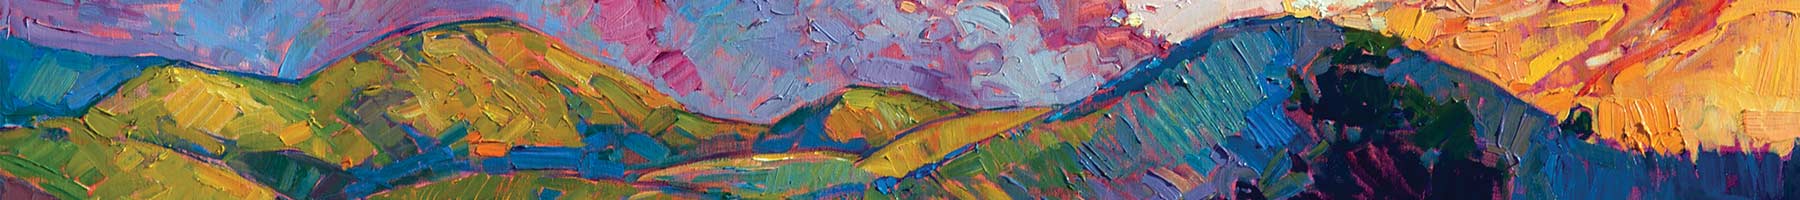 bright oil painting of hills and a orange sunset